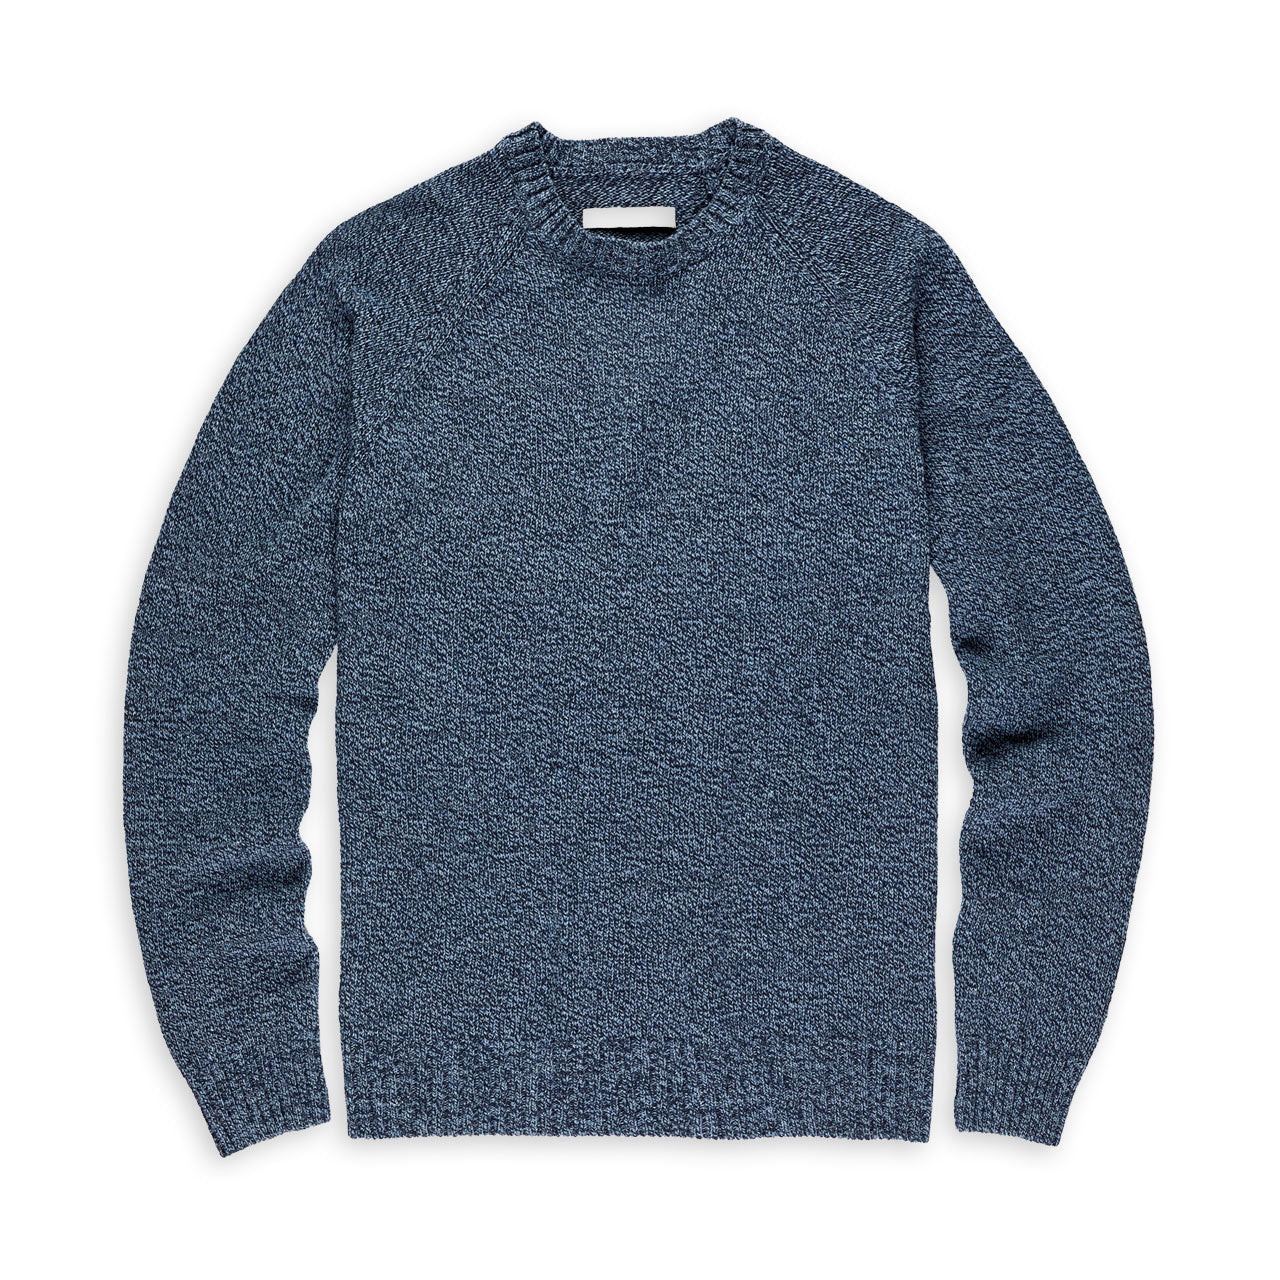 Outerknown Hemisphere Sweater | Uncrate Supply